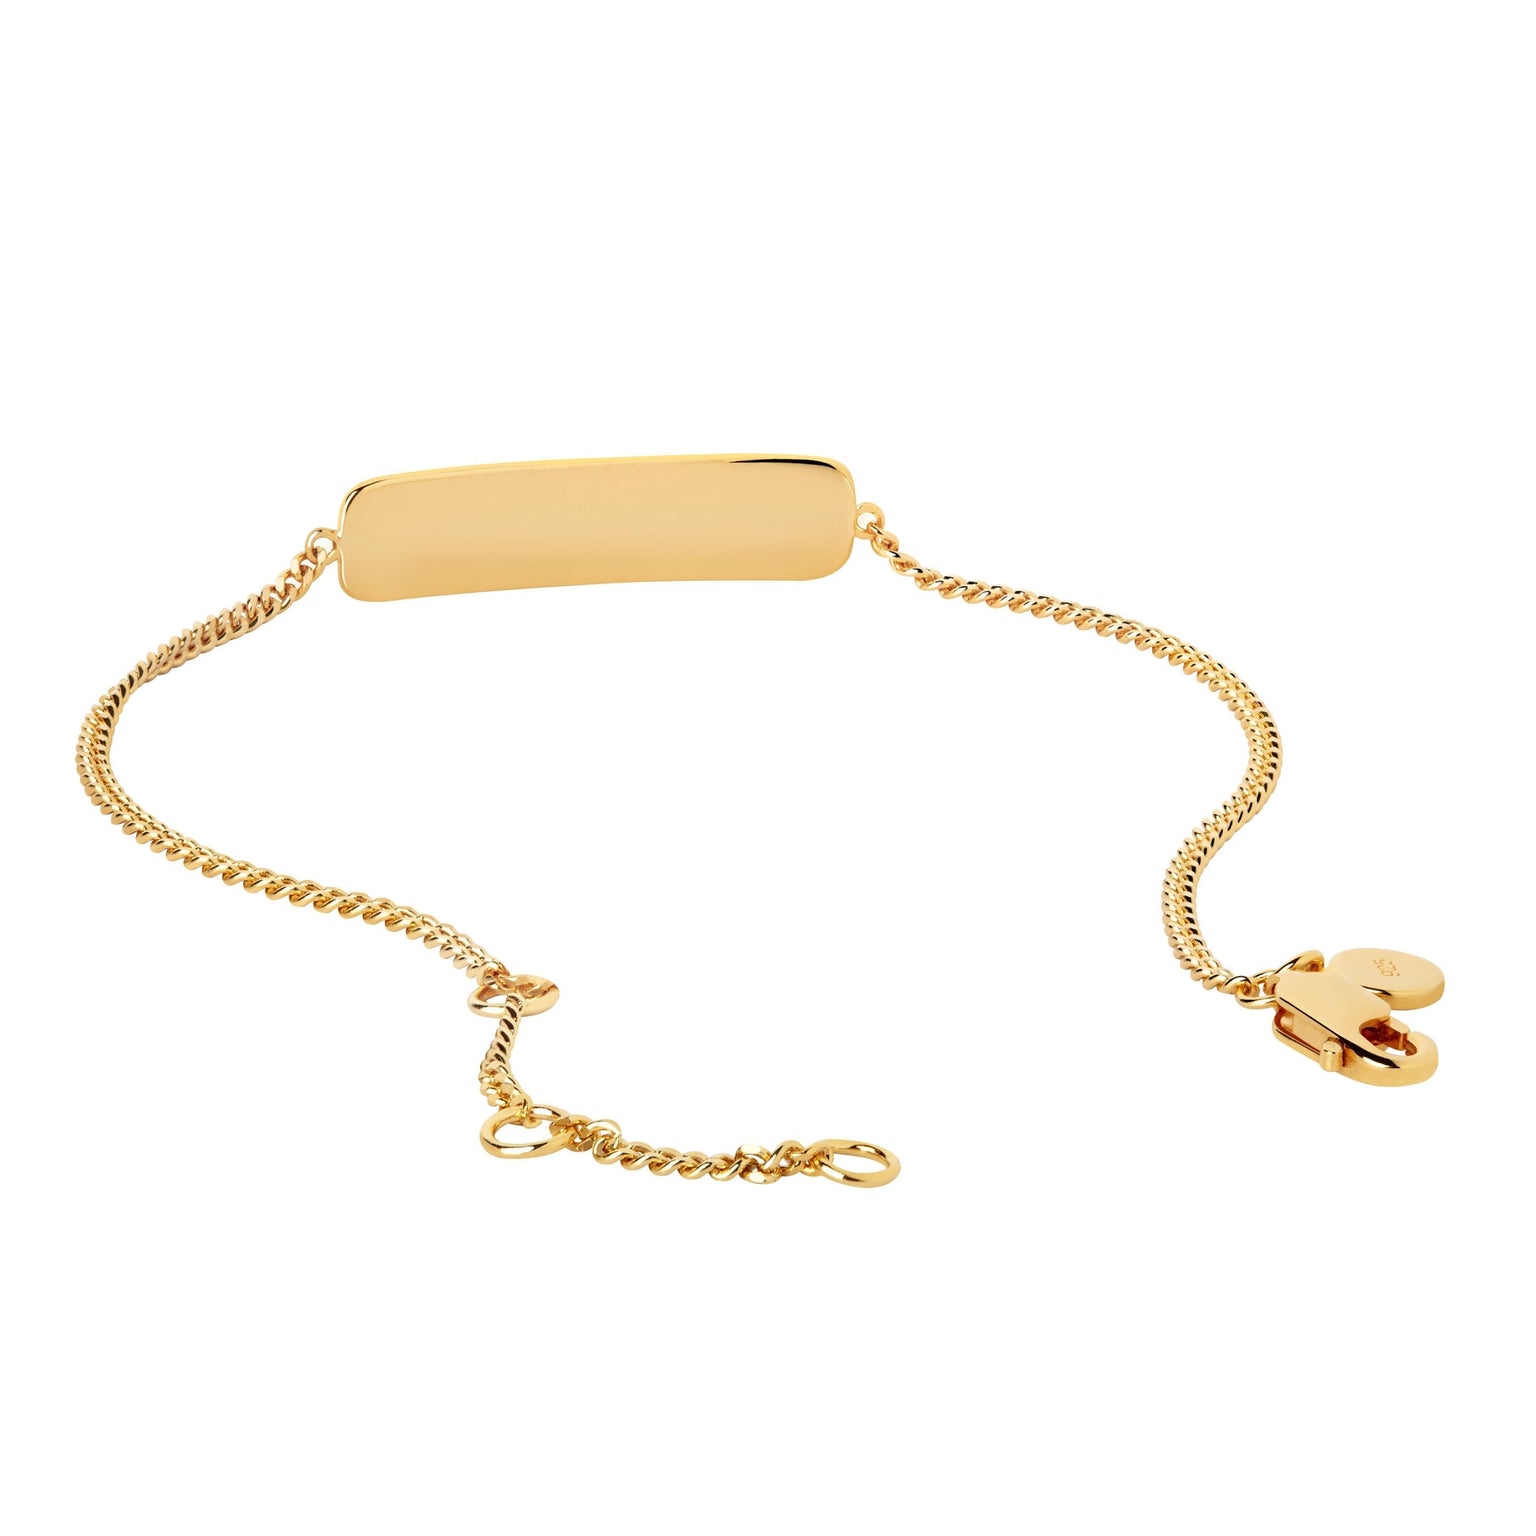 Etched ID Bracelet in Gold with open clasp